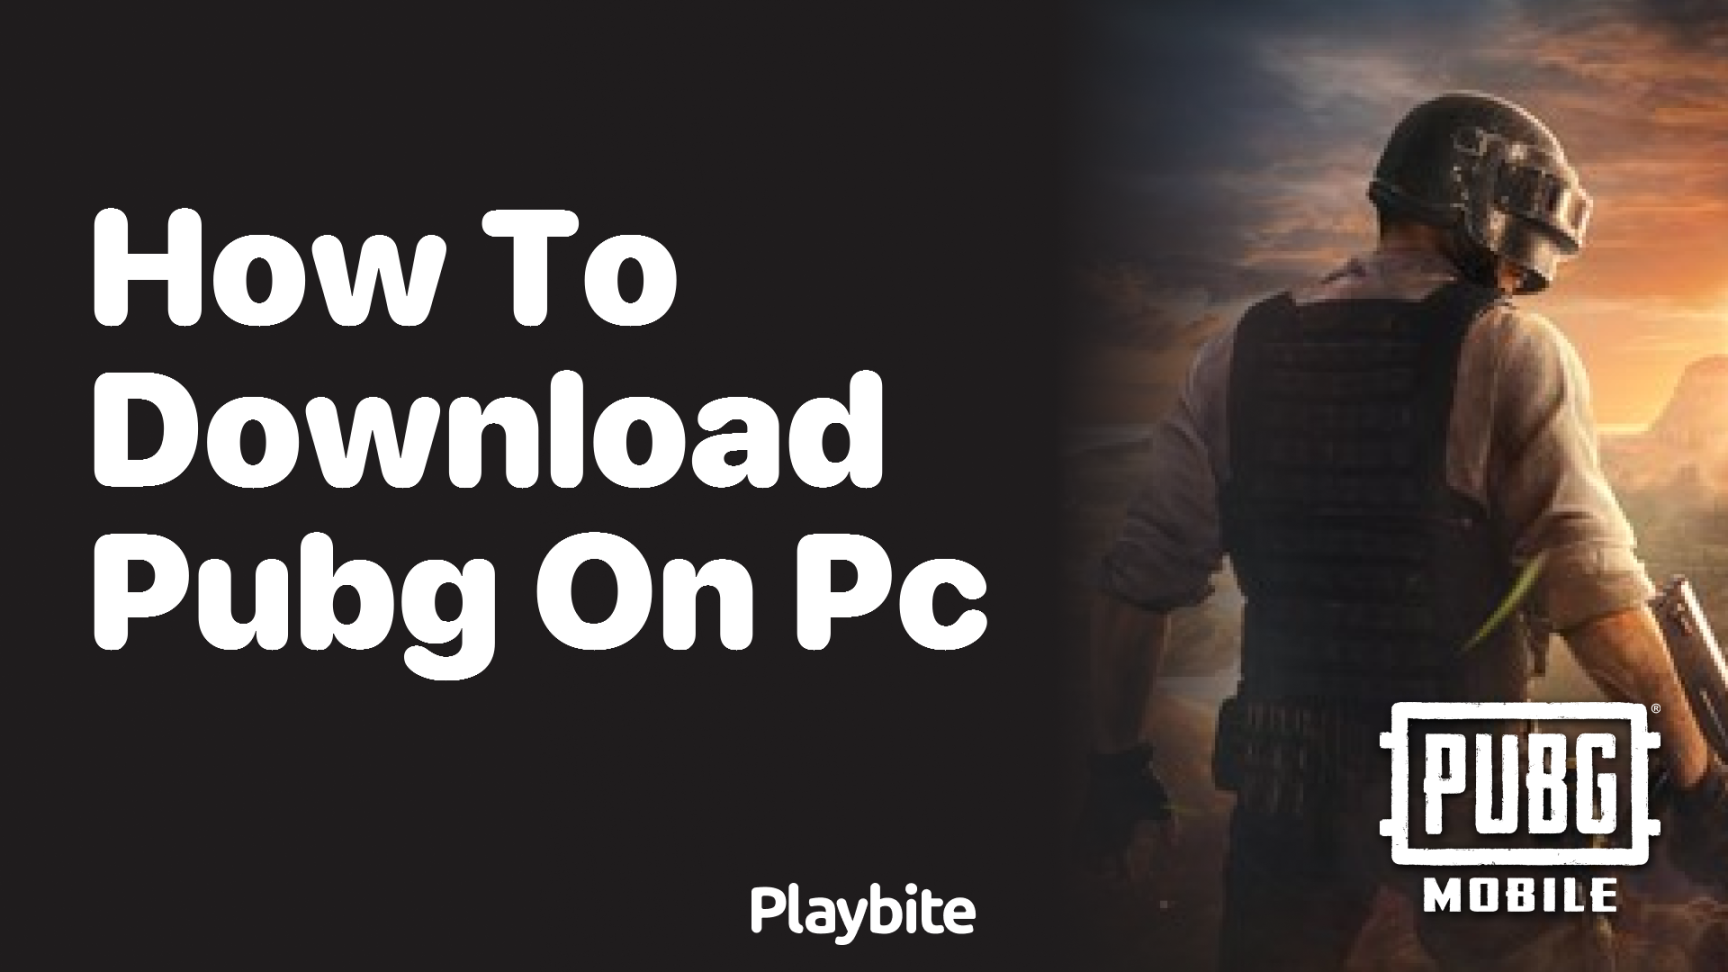 How to Download PUBG on PC: A Quick Guide - Playbite